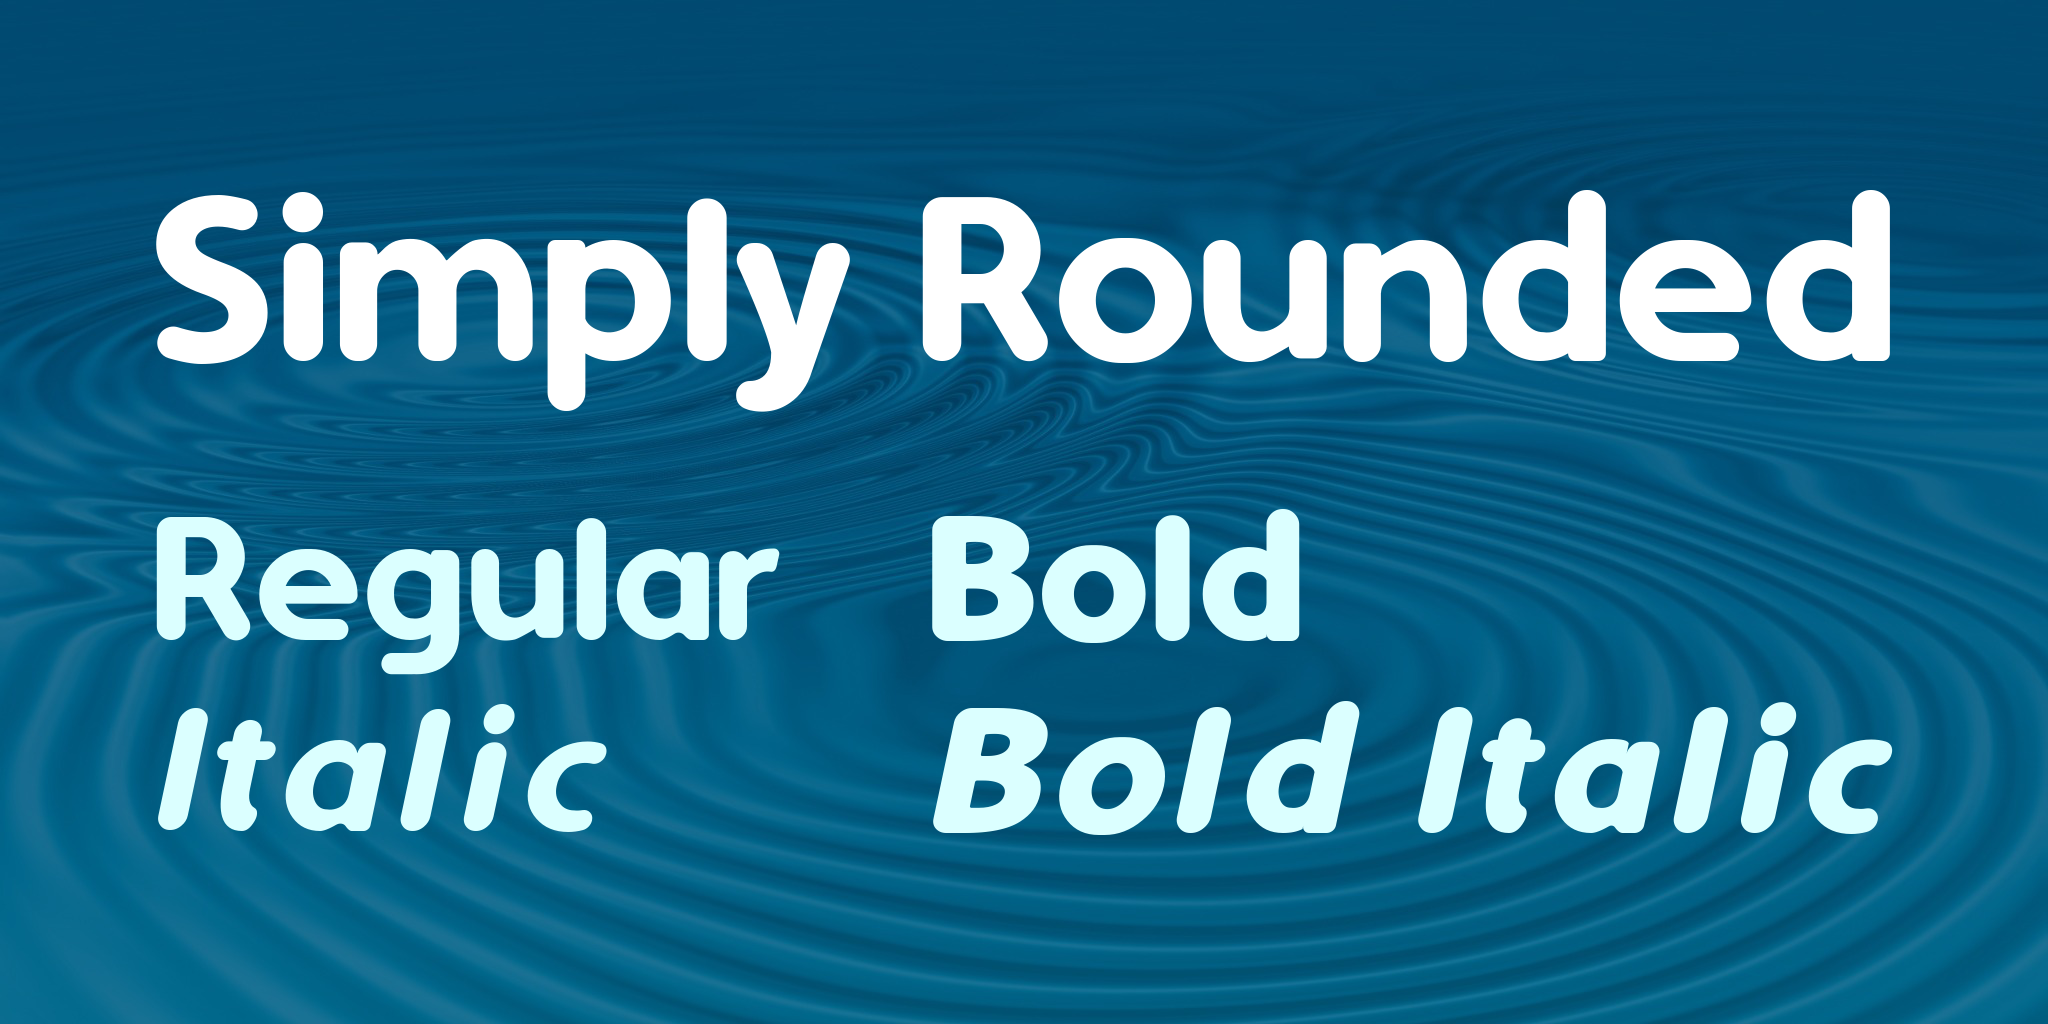 Simply Rounded